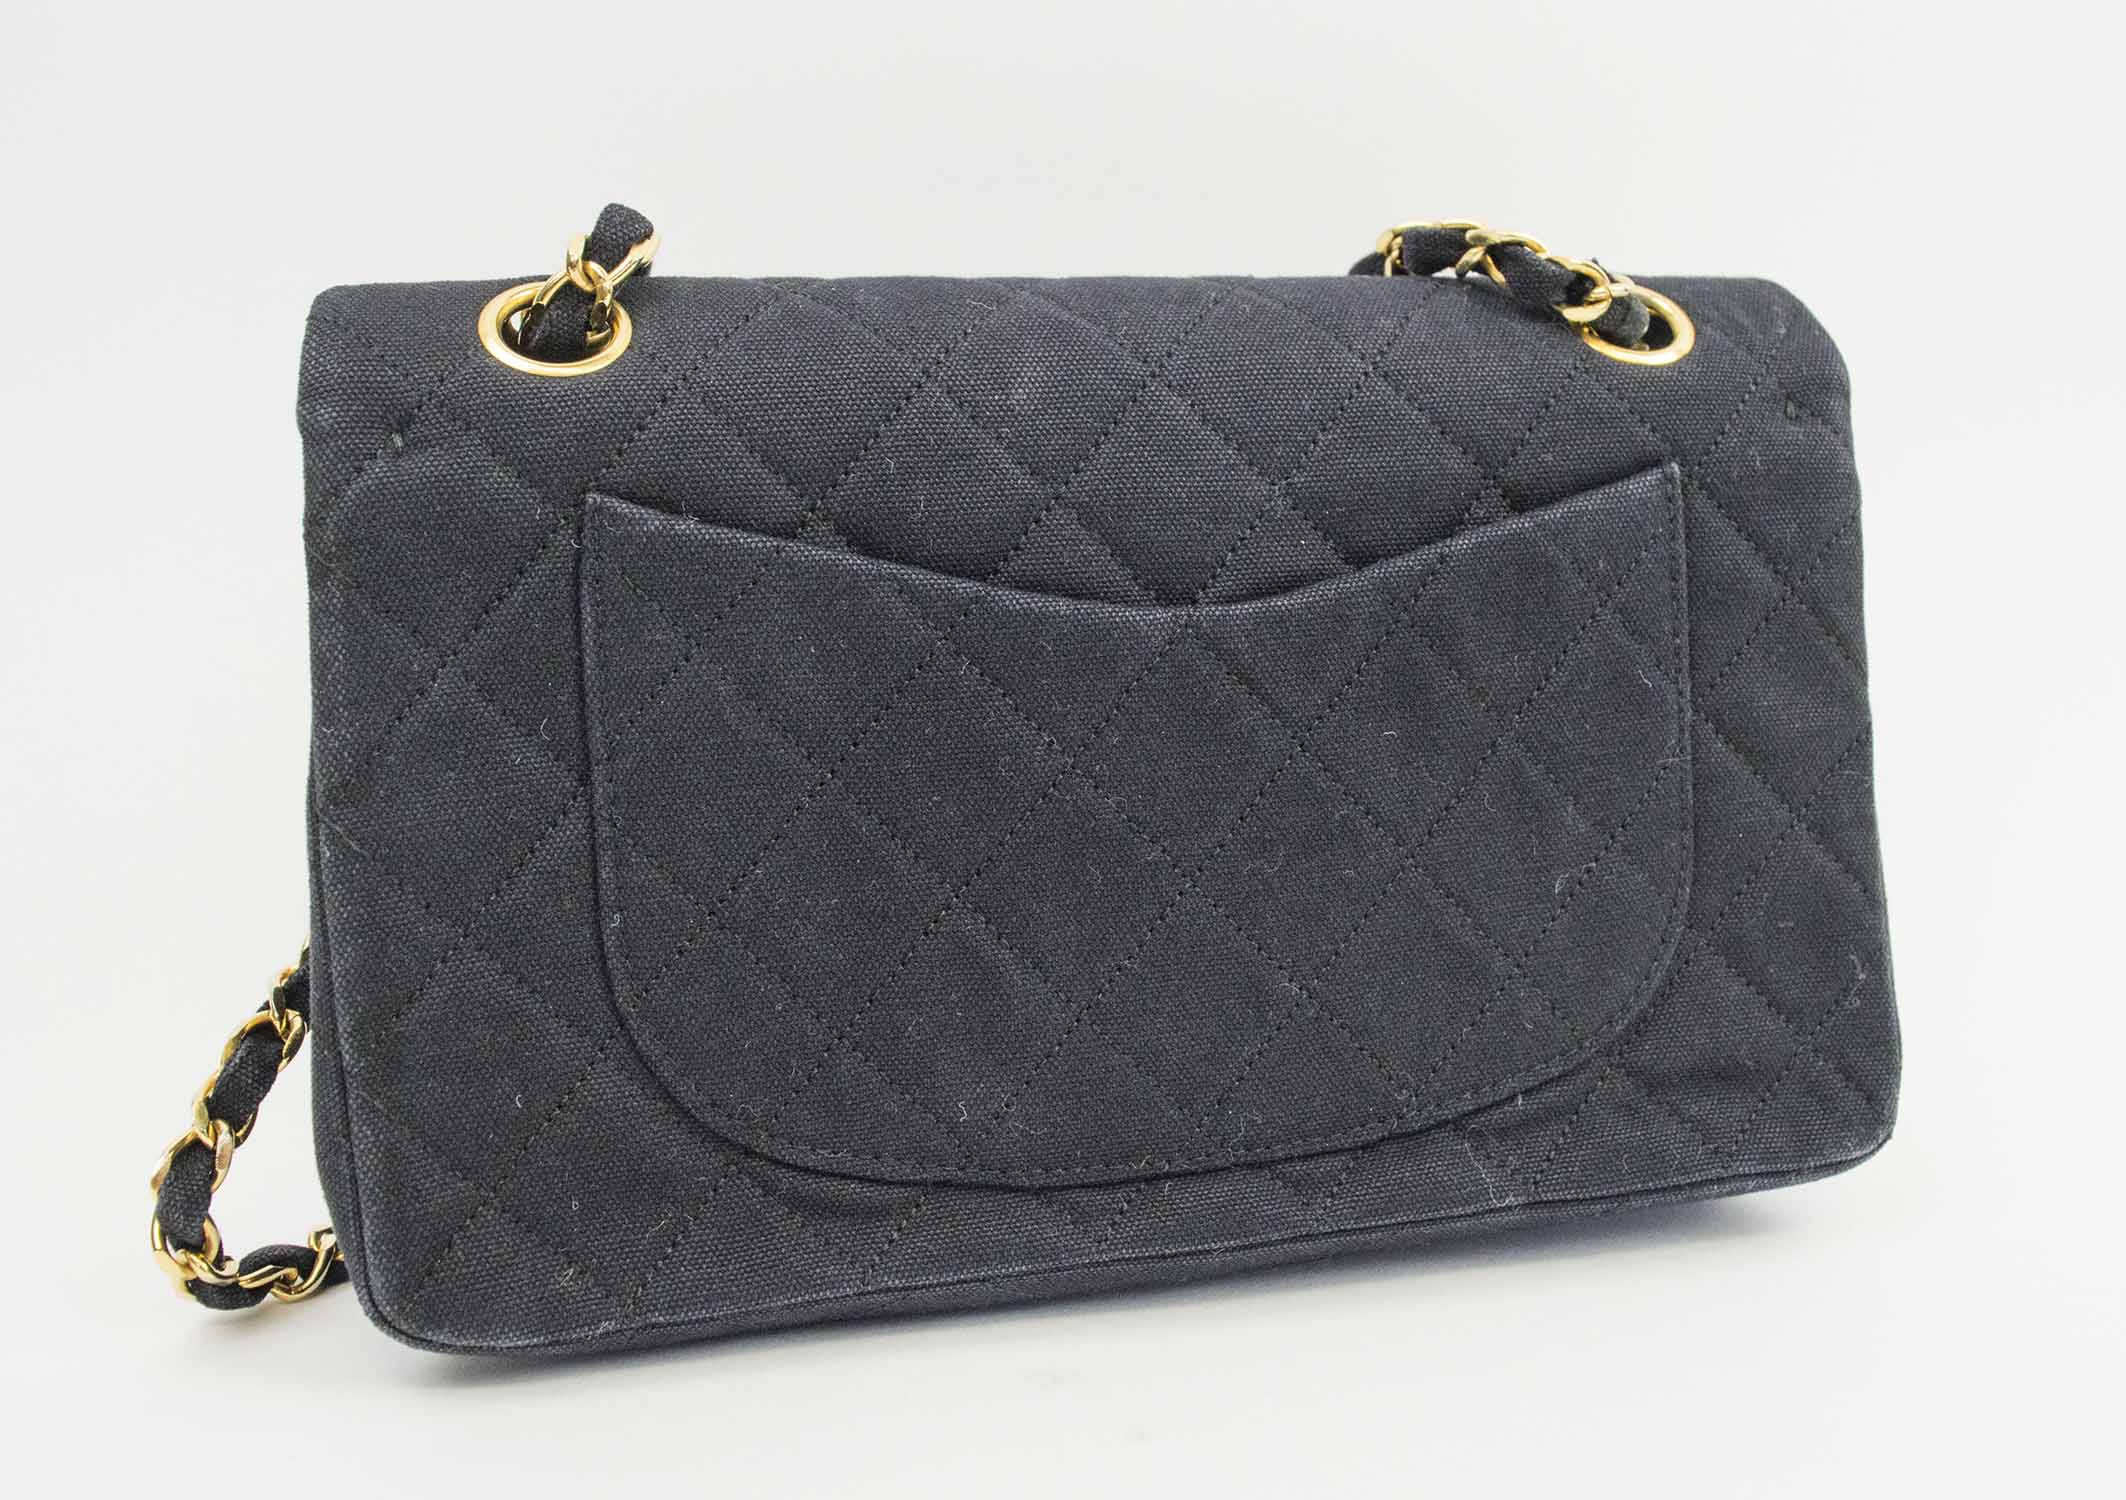 CHANEL CLASSIC FLAP BAG, black fabric with iconic burgundy leather